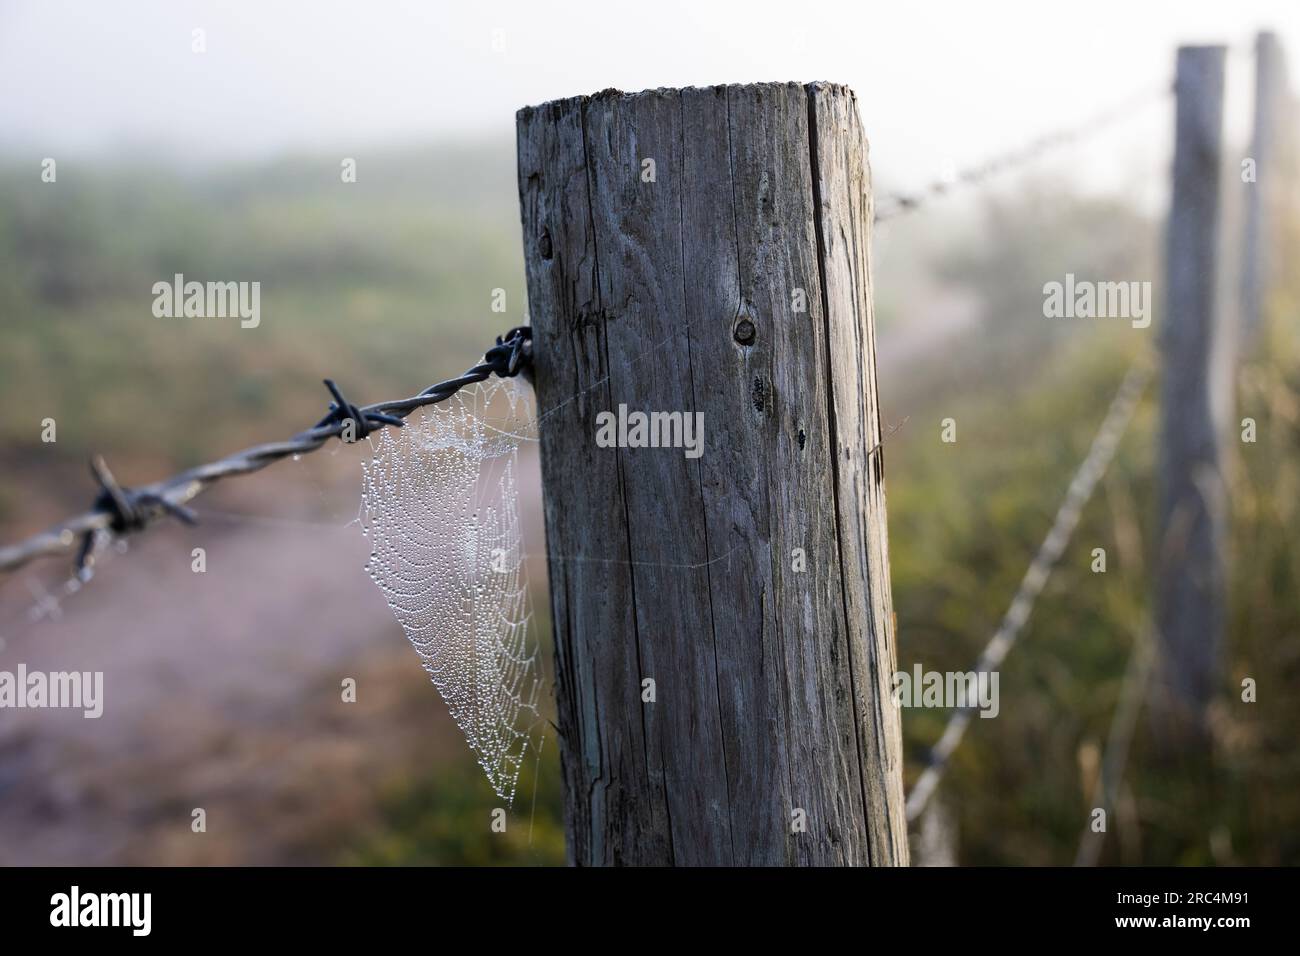 Cobweb with water droplets from early morning mist hangs from a barbed wire and wooden post fence. The background is blurred. Stock Photo